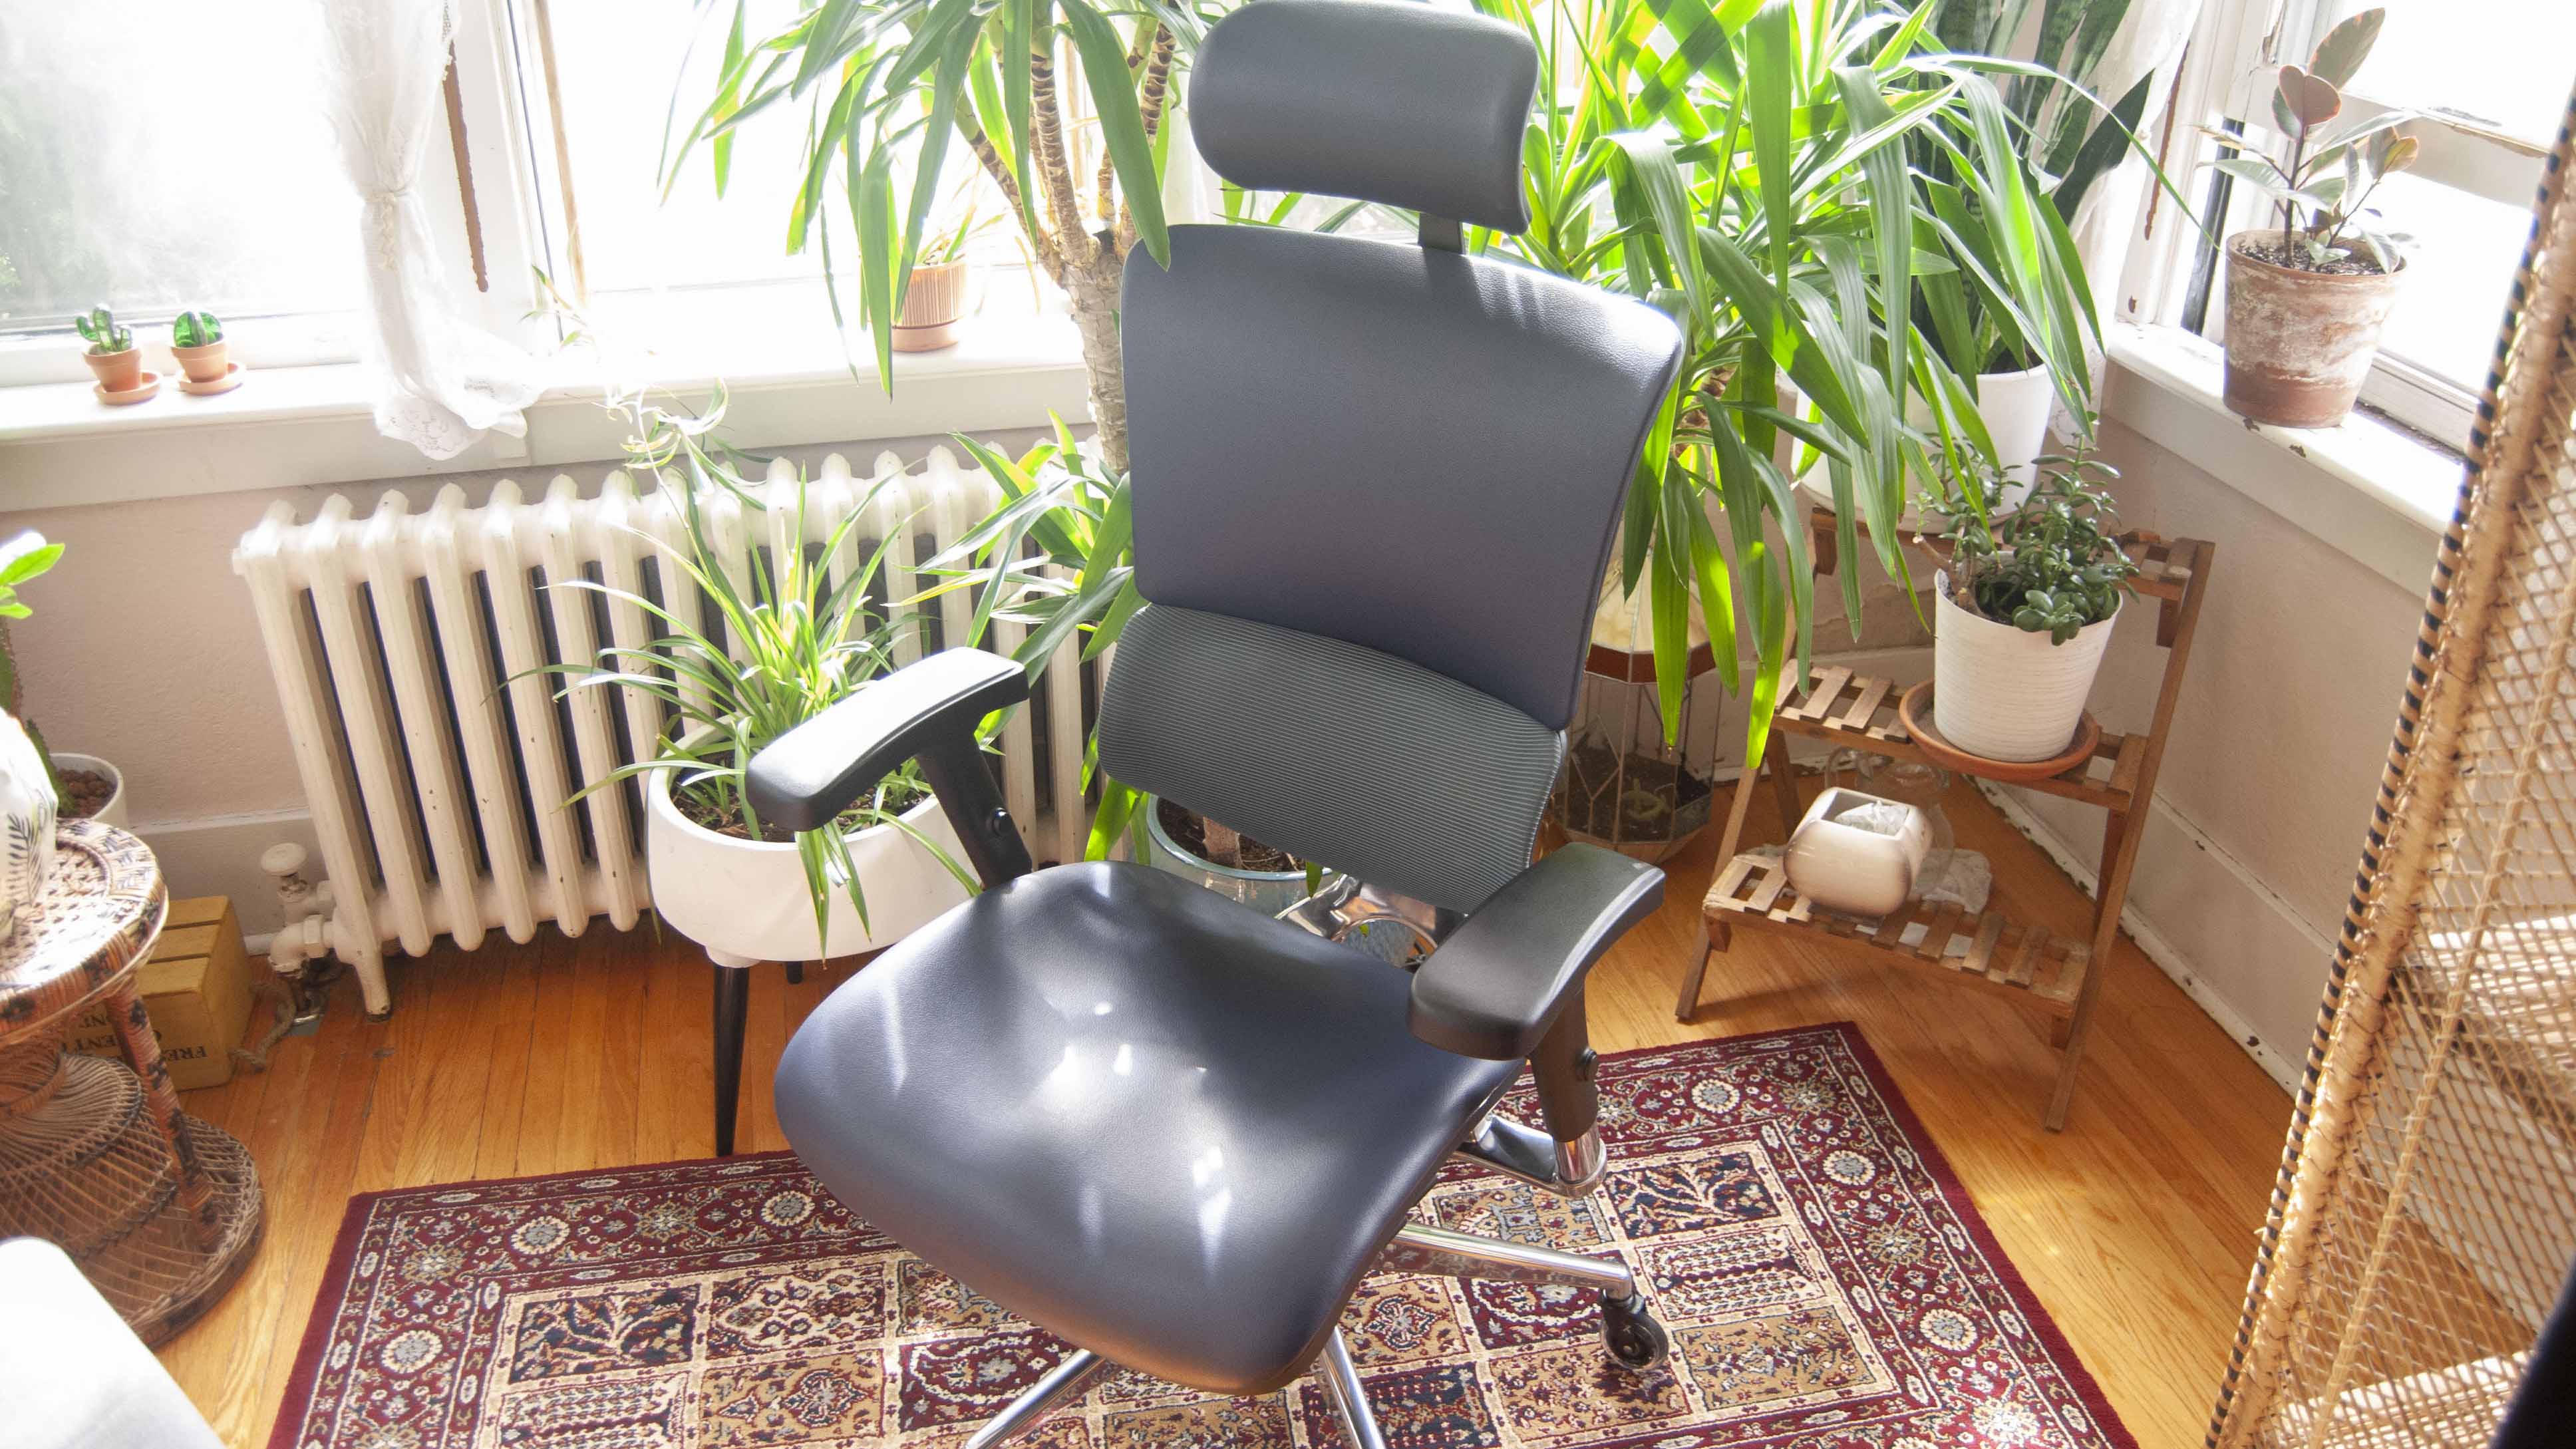 Best Ergonomic Office Chairs in 2024: From Herman Miller to Furmax